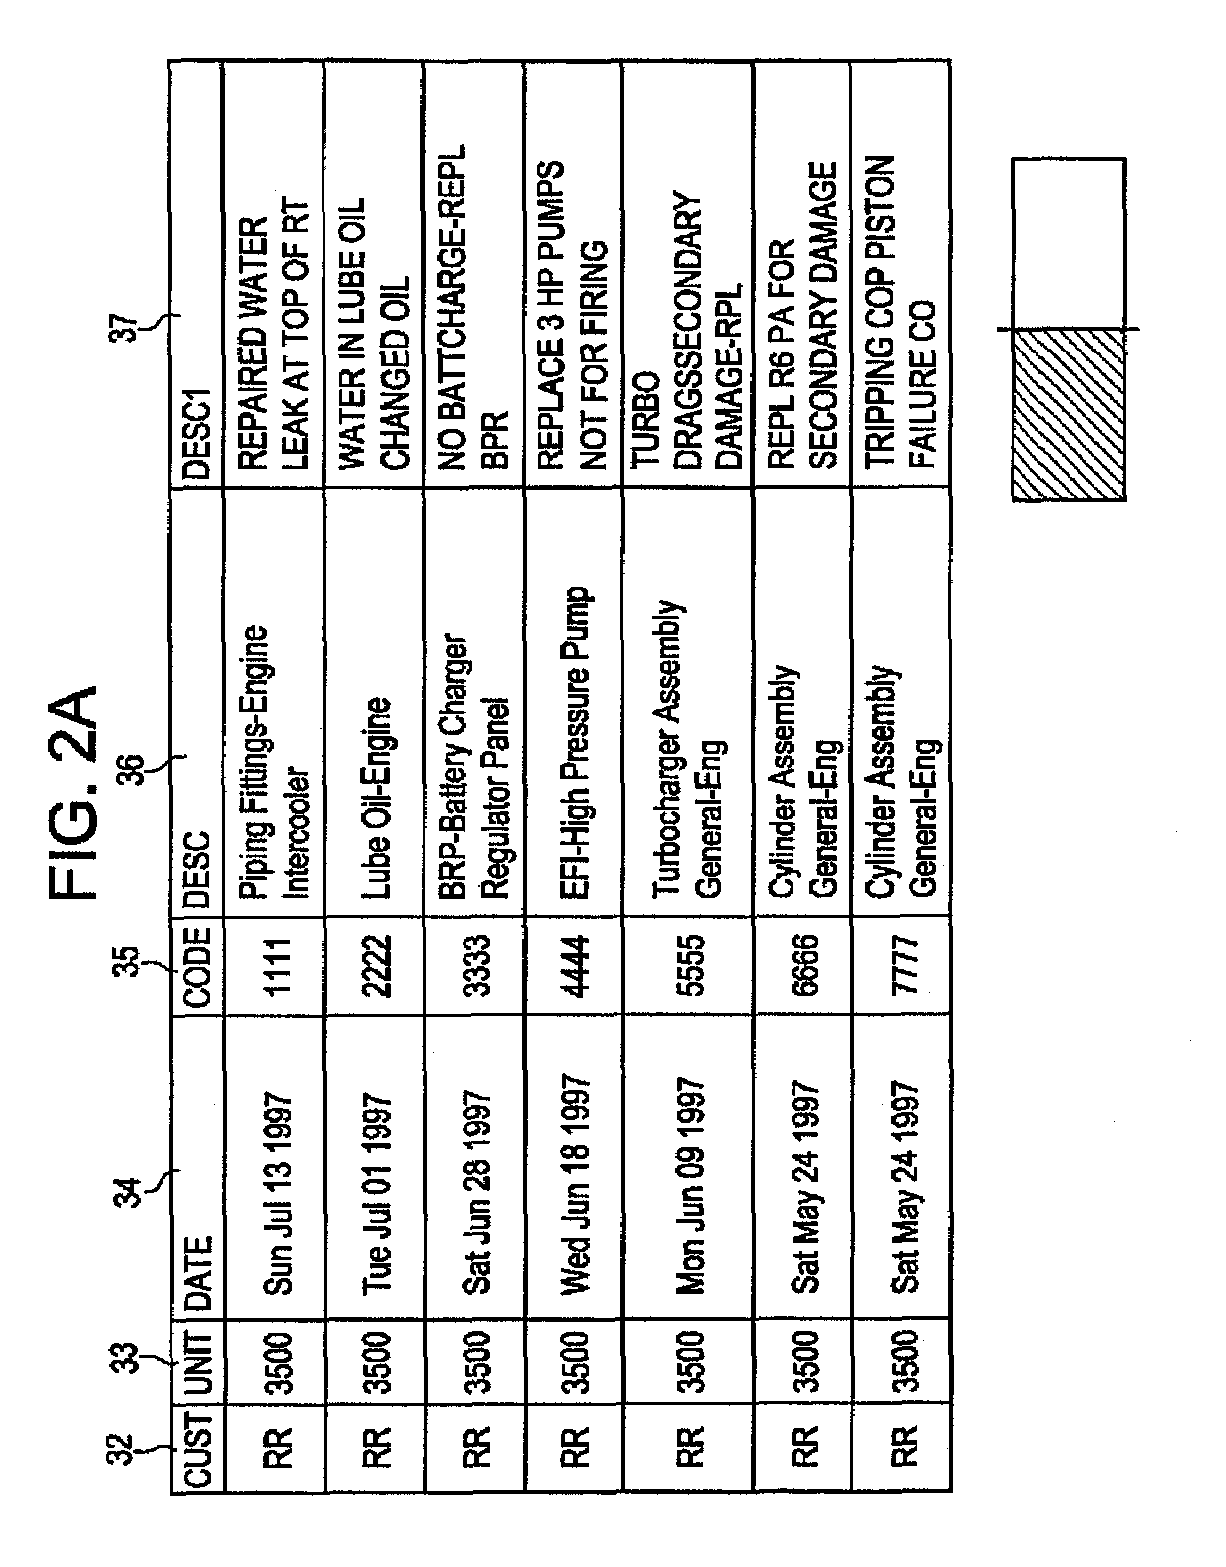 Method and system for analyzing fault and quantized operational data for automated diagnostics of locomotives